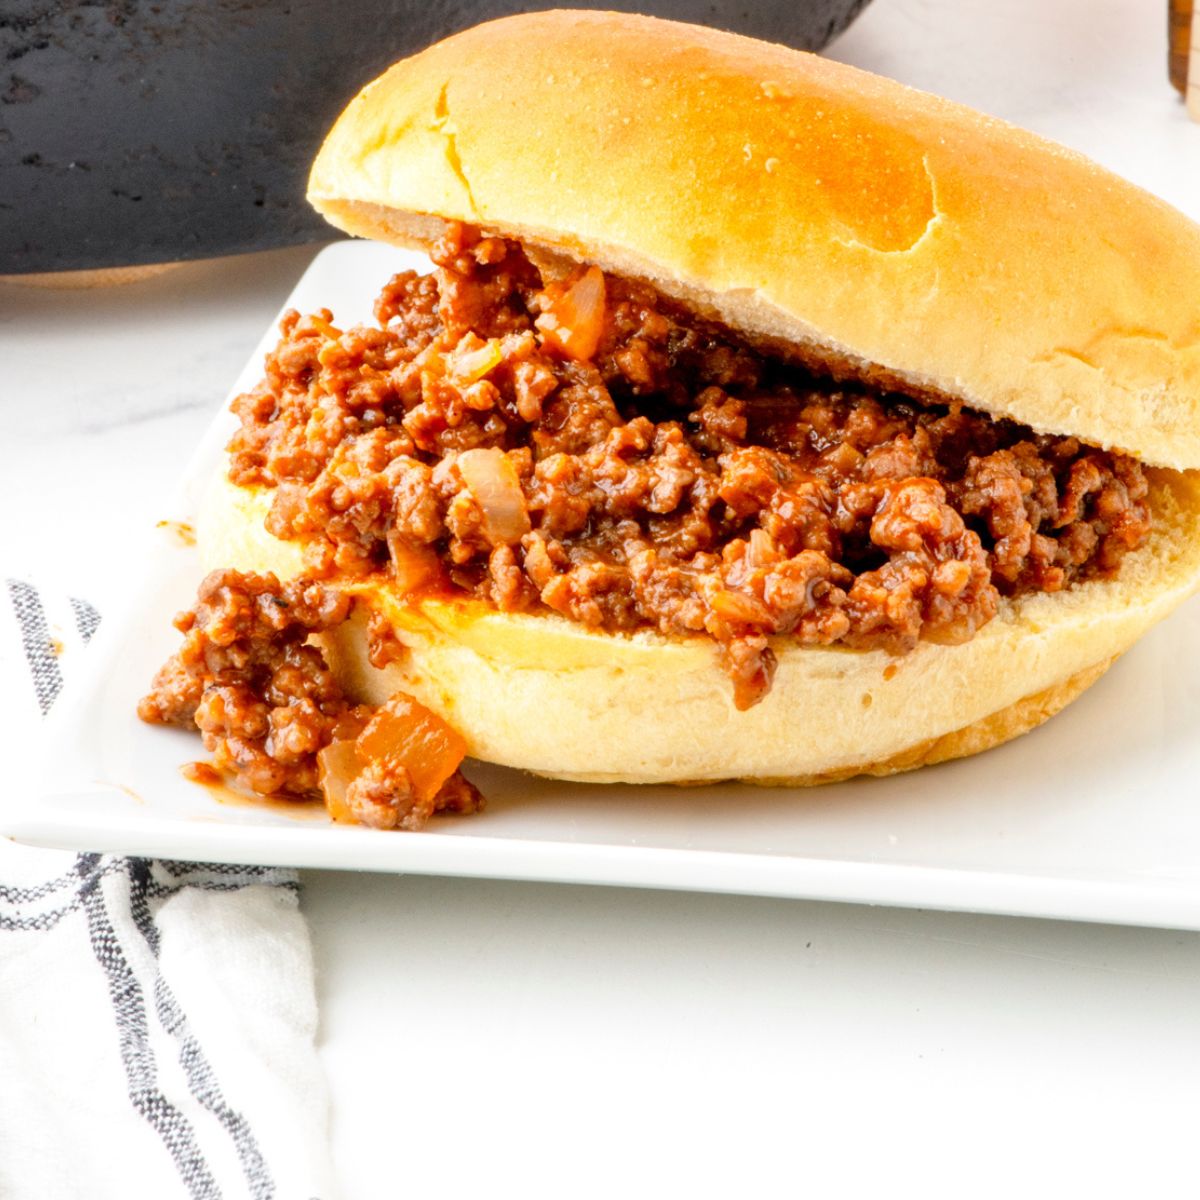 Classic old fashioned sloppy joes recipe in a bun on a serving plate